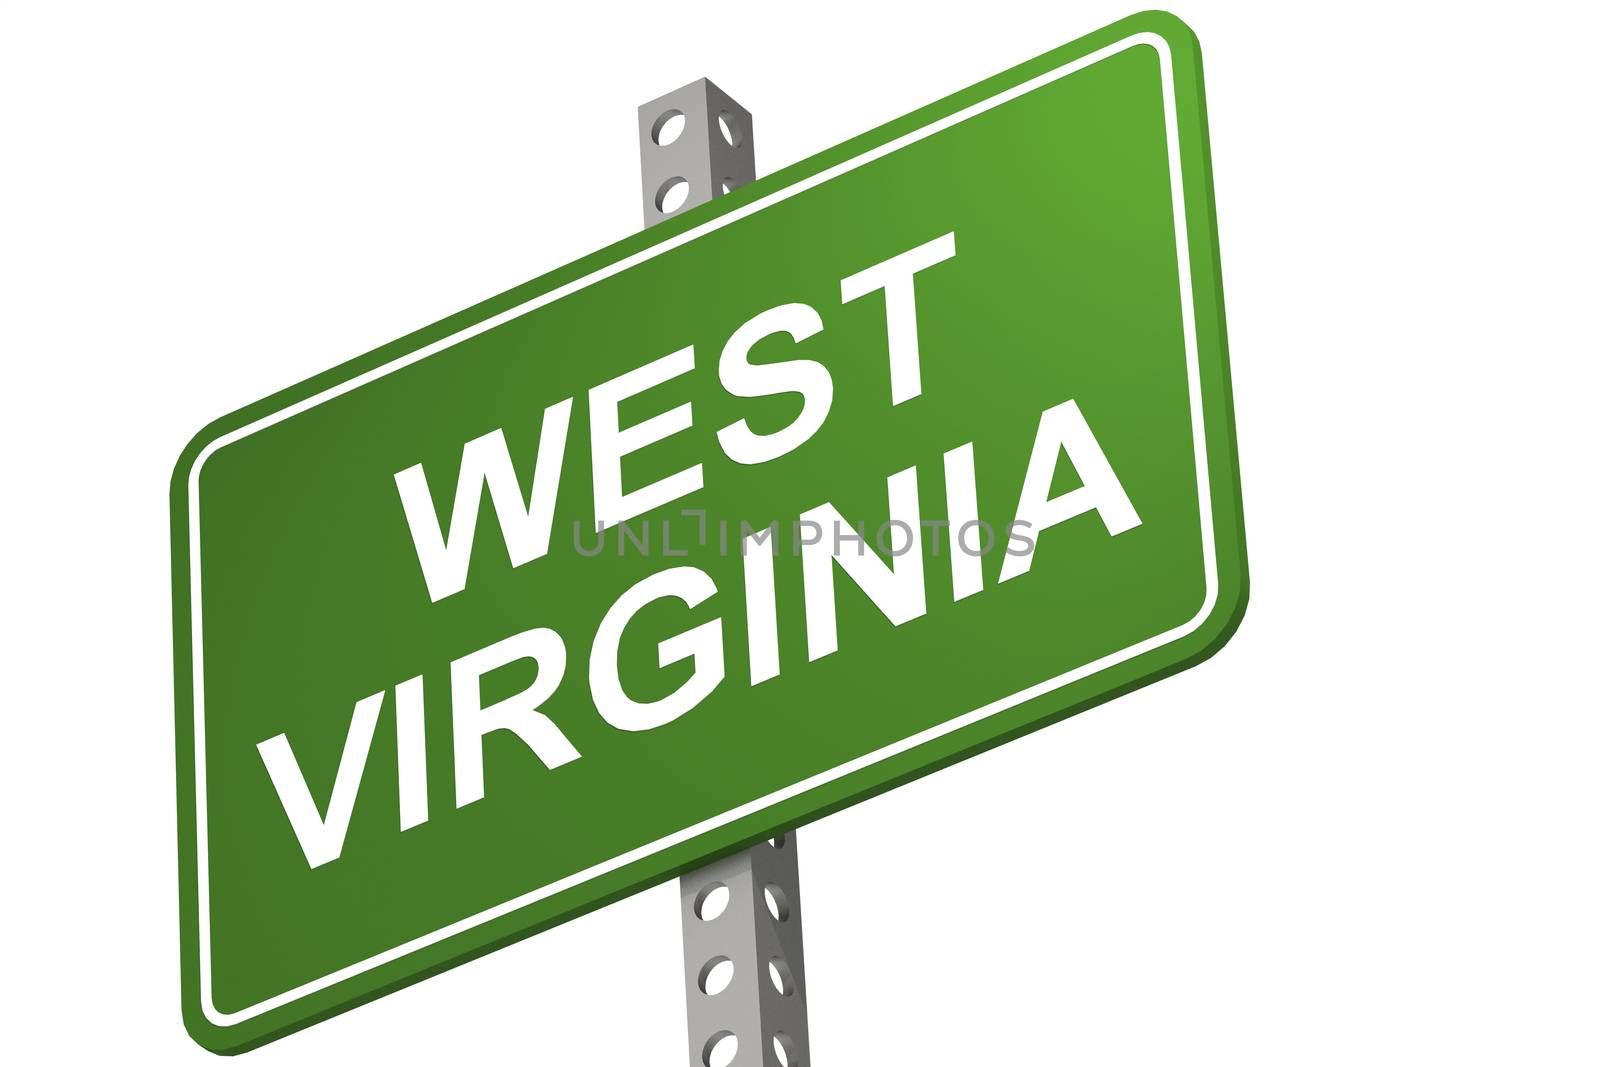 West virginia road sign on white background, 3D rendering